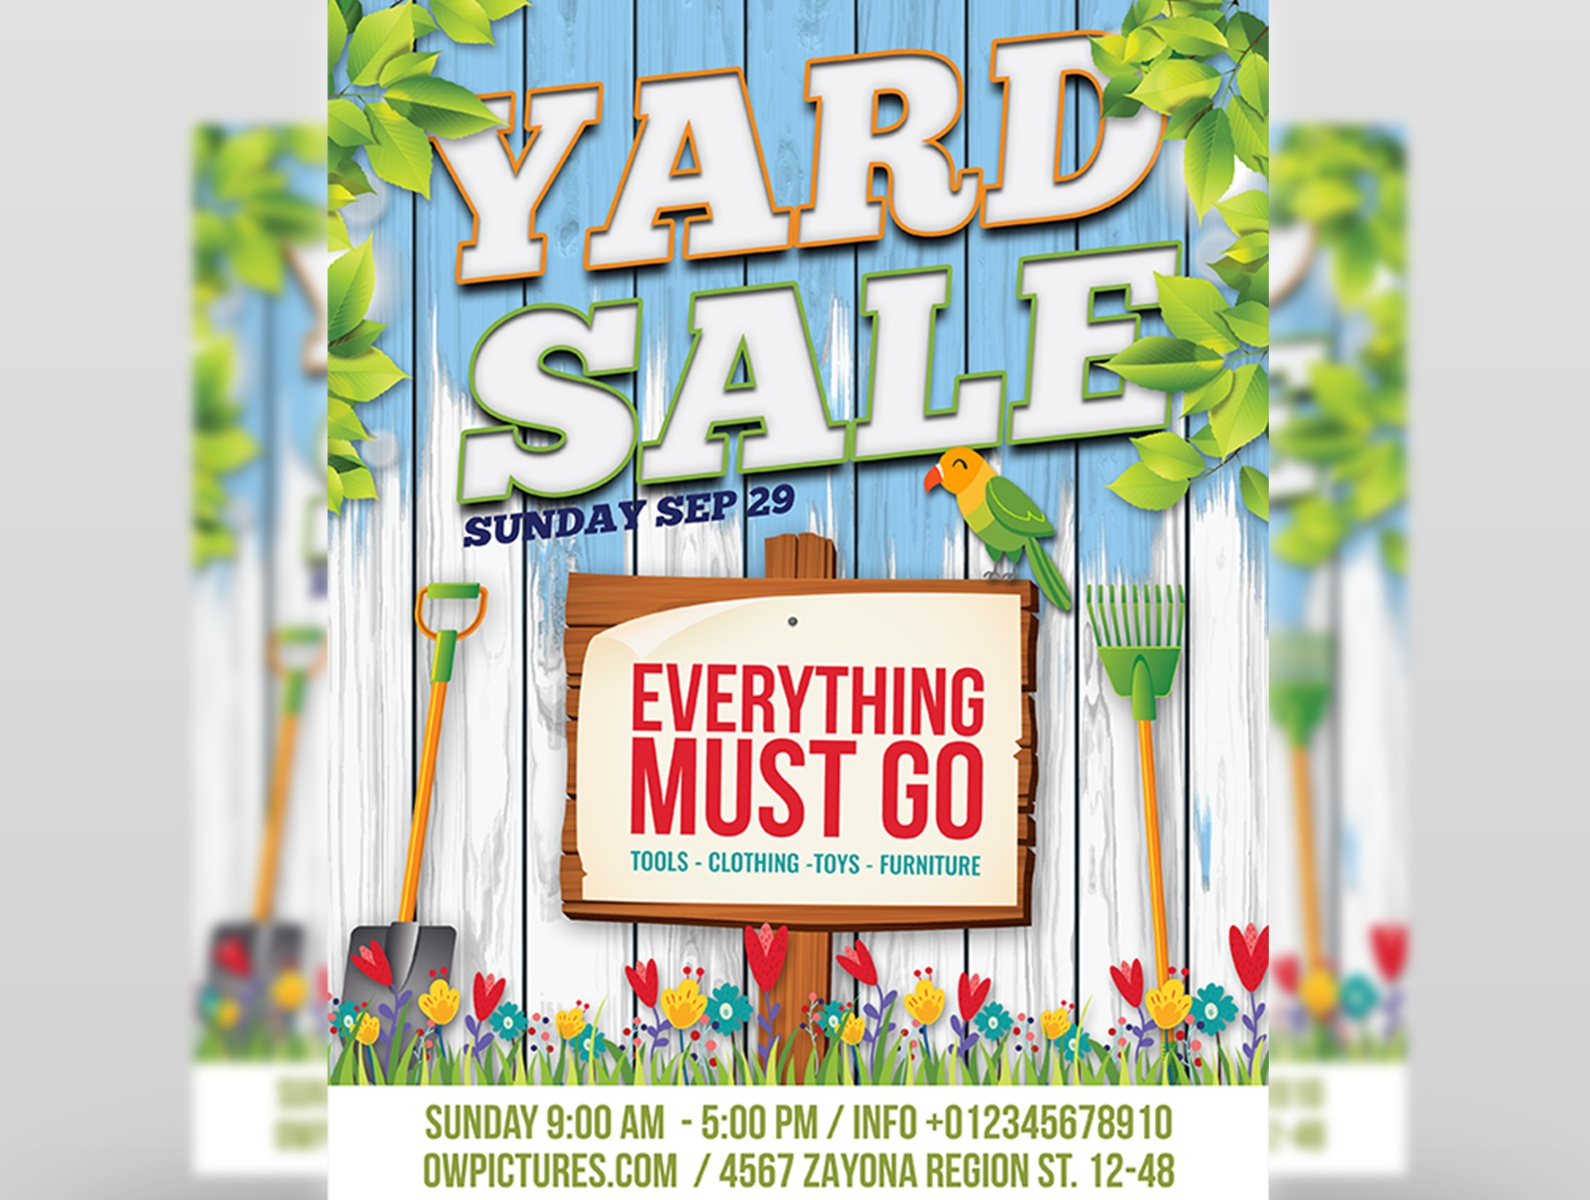 Yard Sale - Garage Sales Flyer Template by OWPictures on Dribbble With Regard To Moving Sale Flyer Template In Moving Sale Flyer Template